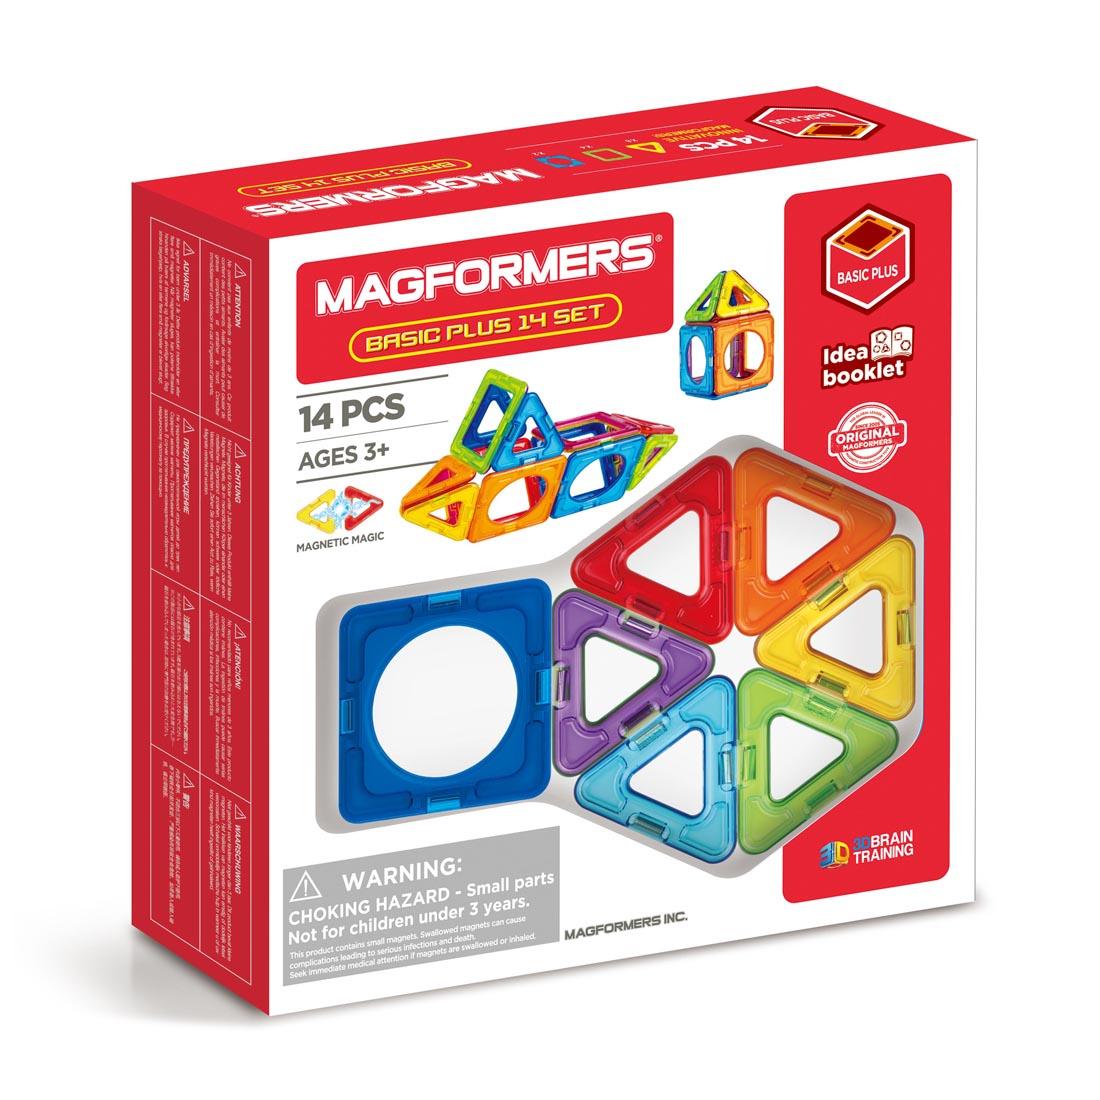 box for the Magformers 14-Piece Basic Plus Set